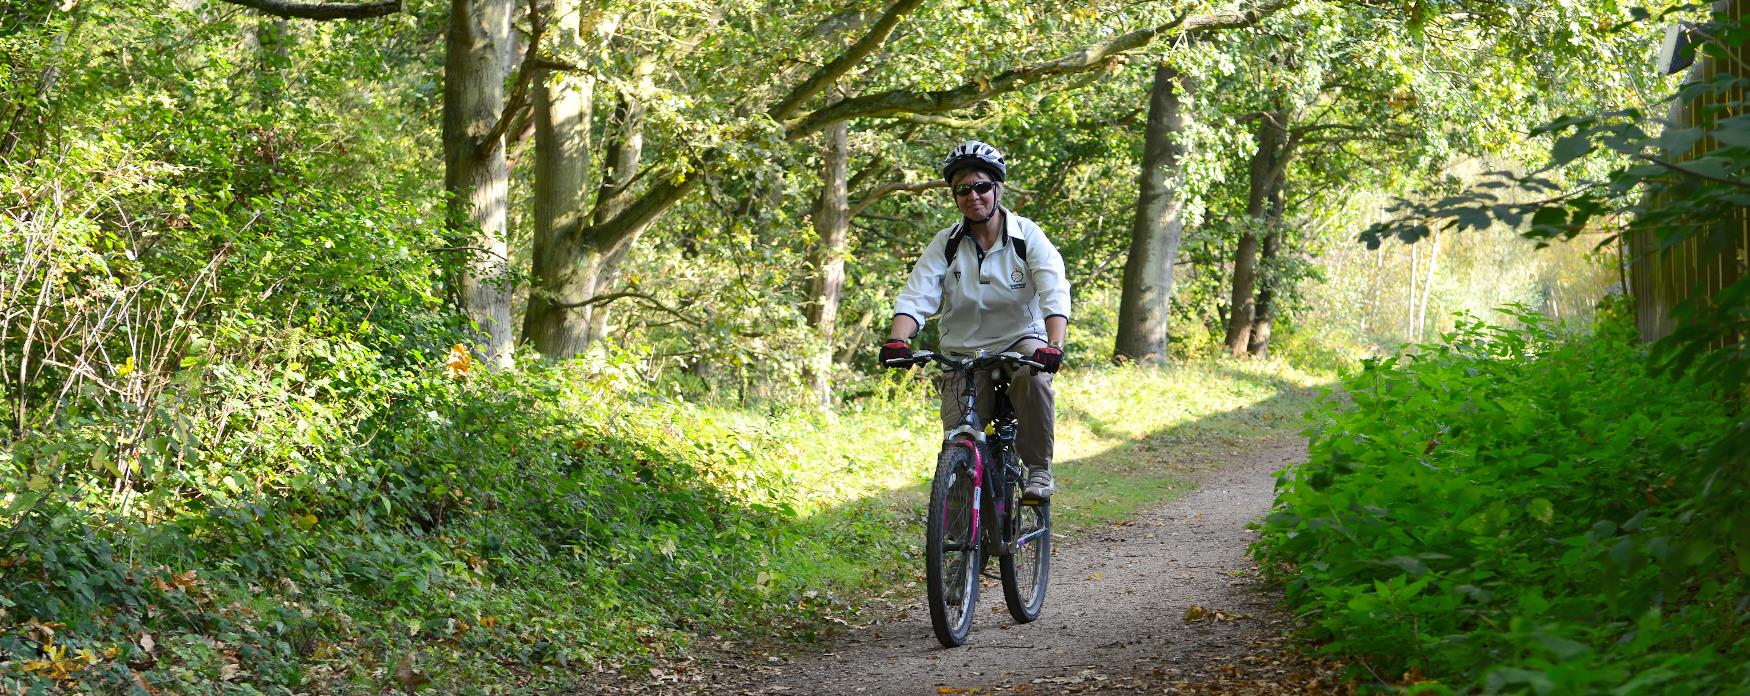 Marriott's Way Cycle Route